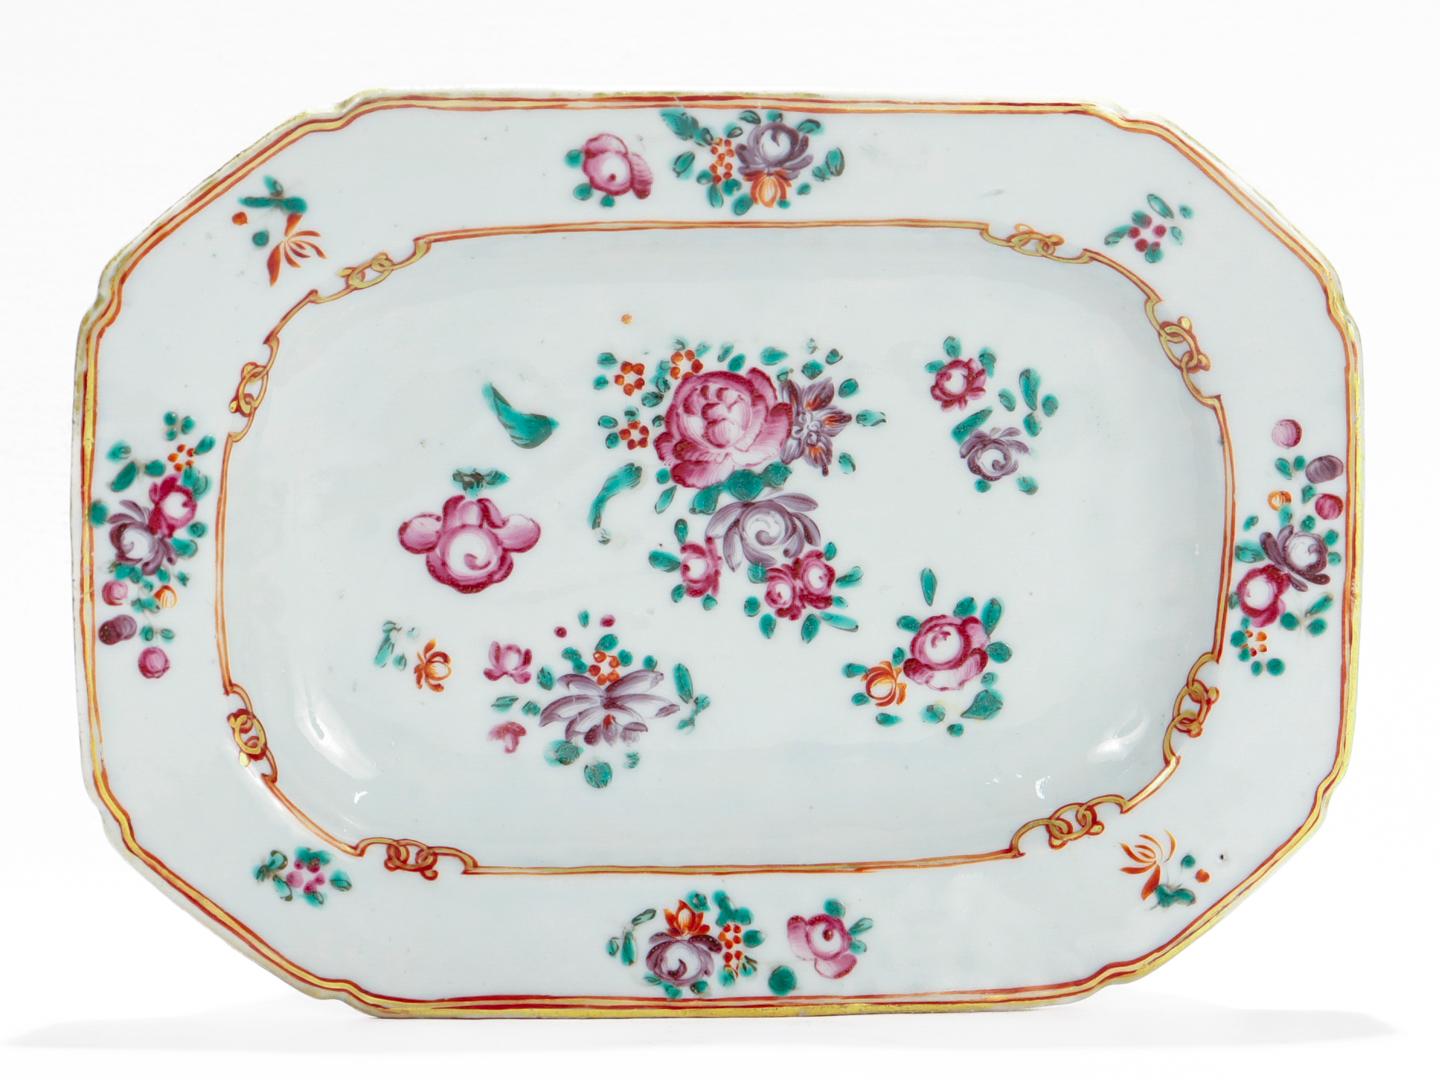 A small Chinese Export porcelain tray or dish.

Decorated in Famille Rose flowers and leafwork with a gilded rim and interior edge.

Having a wonderful orange peel finish to the glaze and retaining the majority of its gilding.

Simply a wonderful